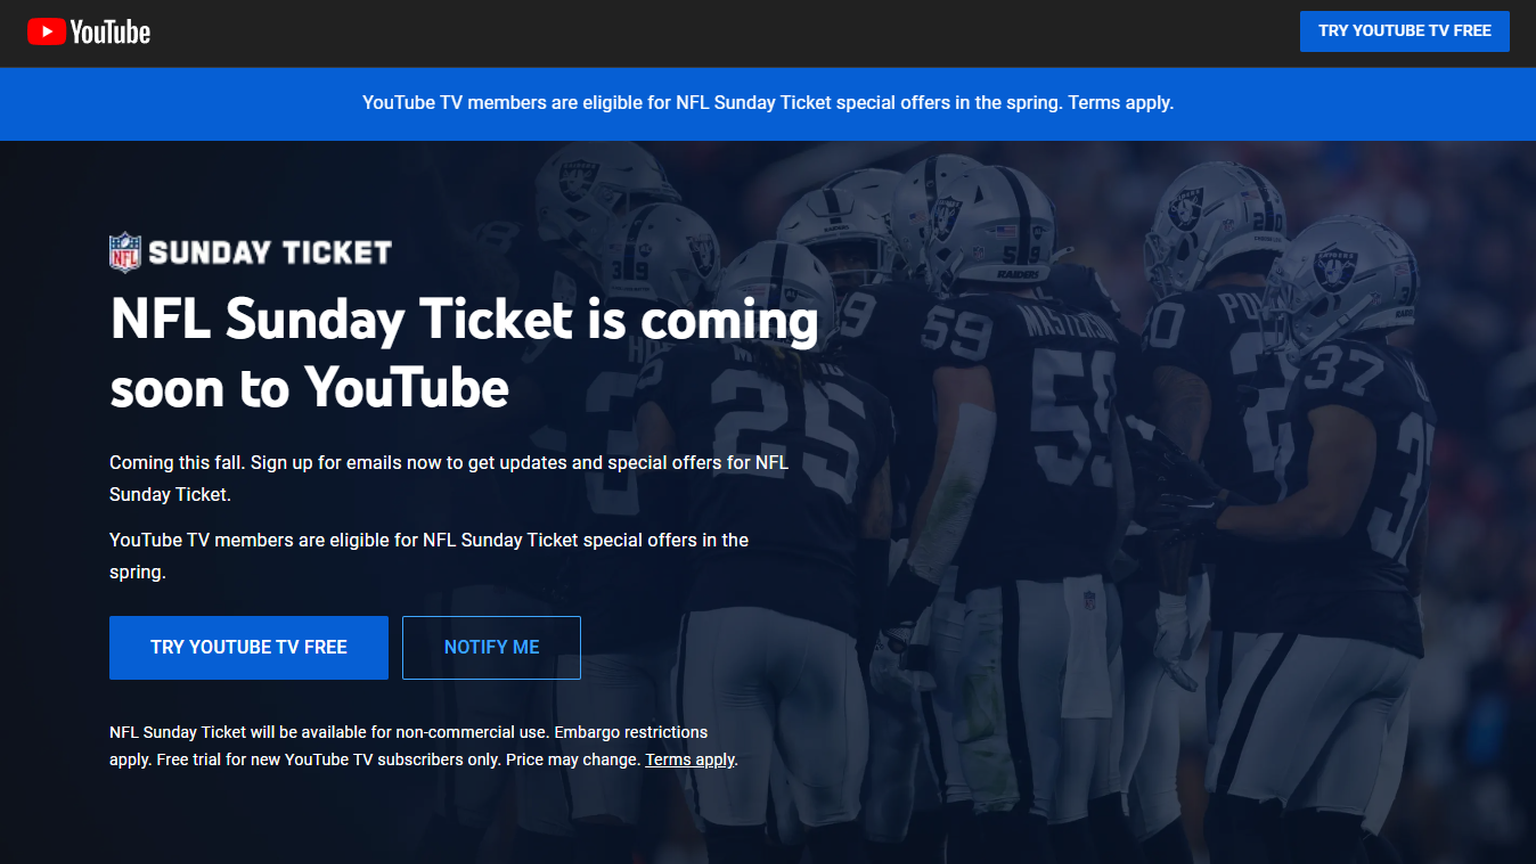 CEO Confirms NFL Sunday Ticket Will Offer Ability to Watch